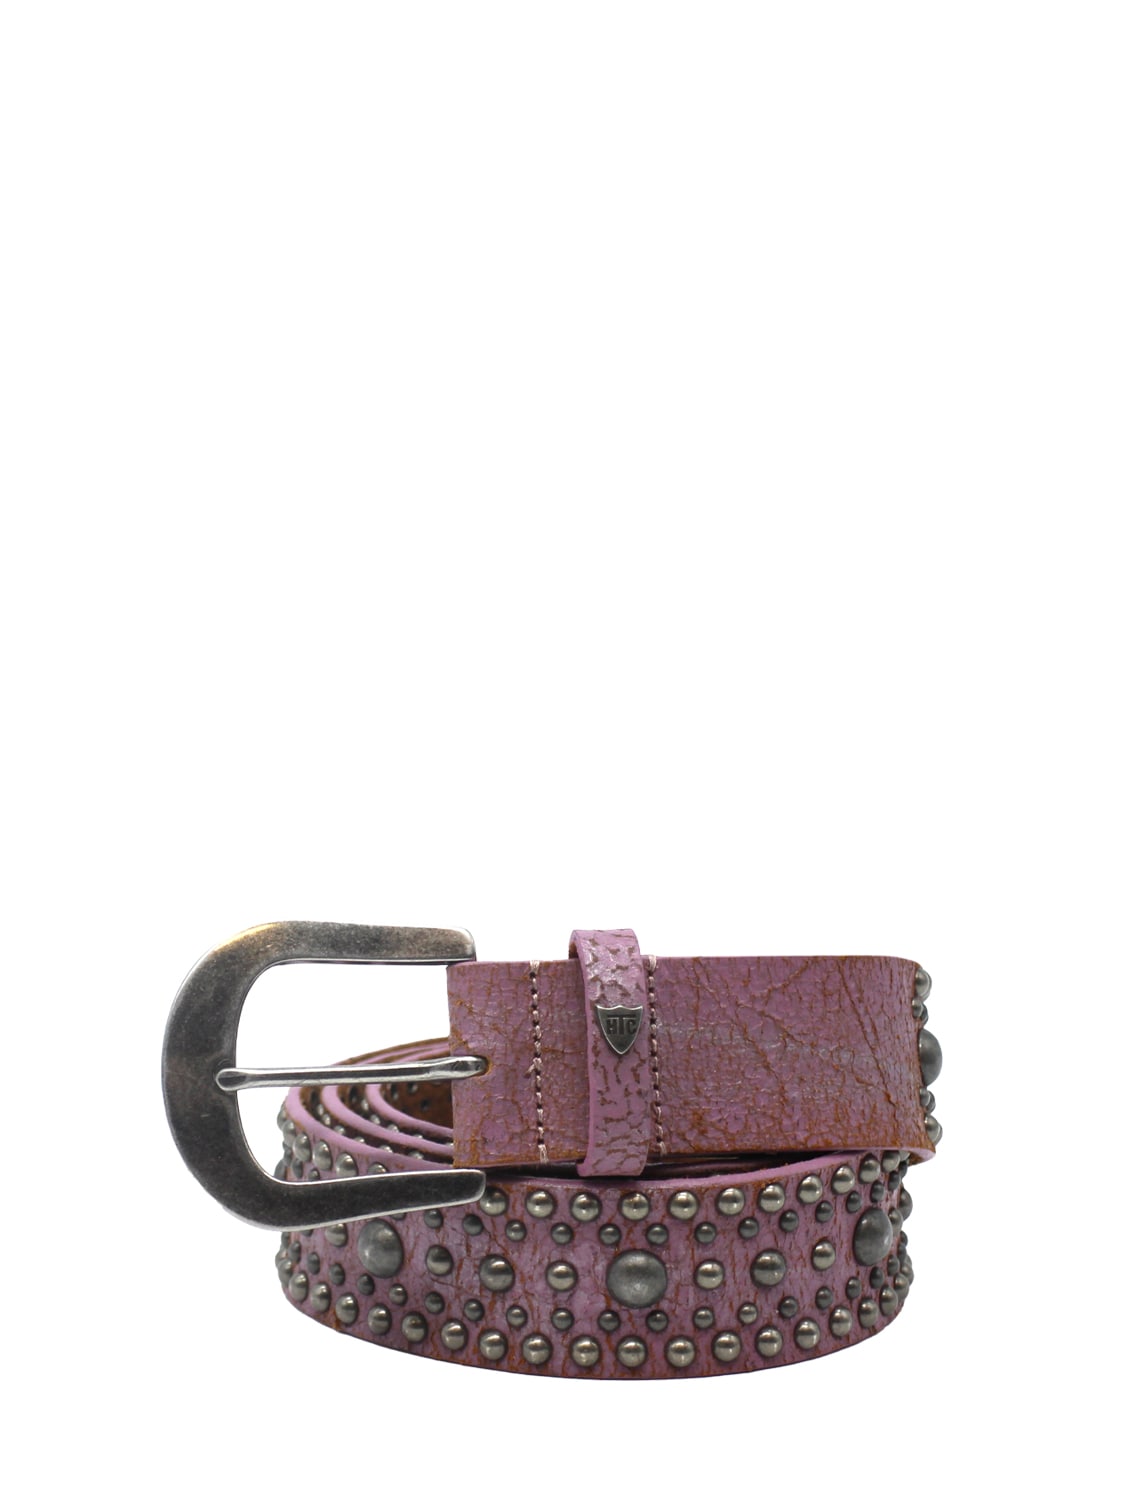 Htc Los Angeles 3.5cm Studded Leather Belt In Pink